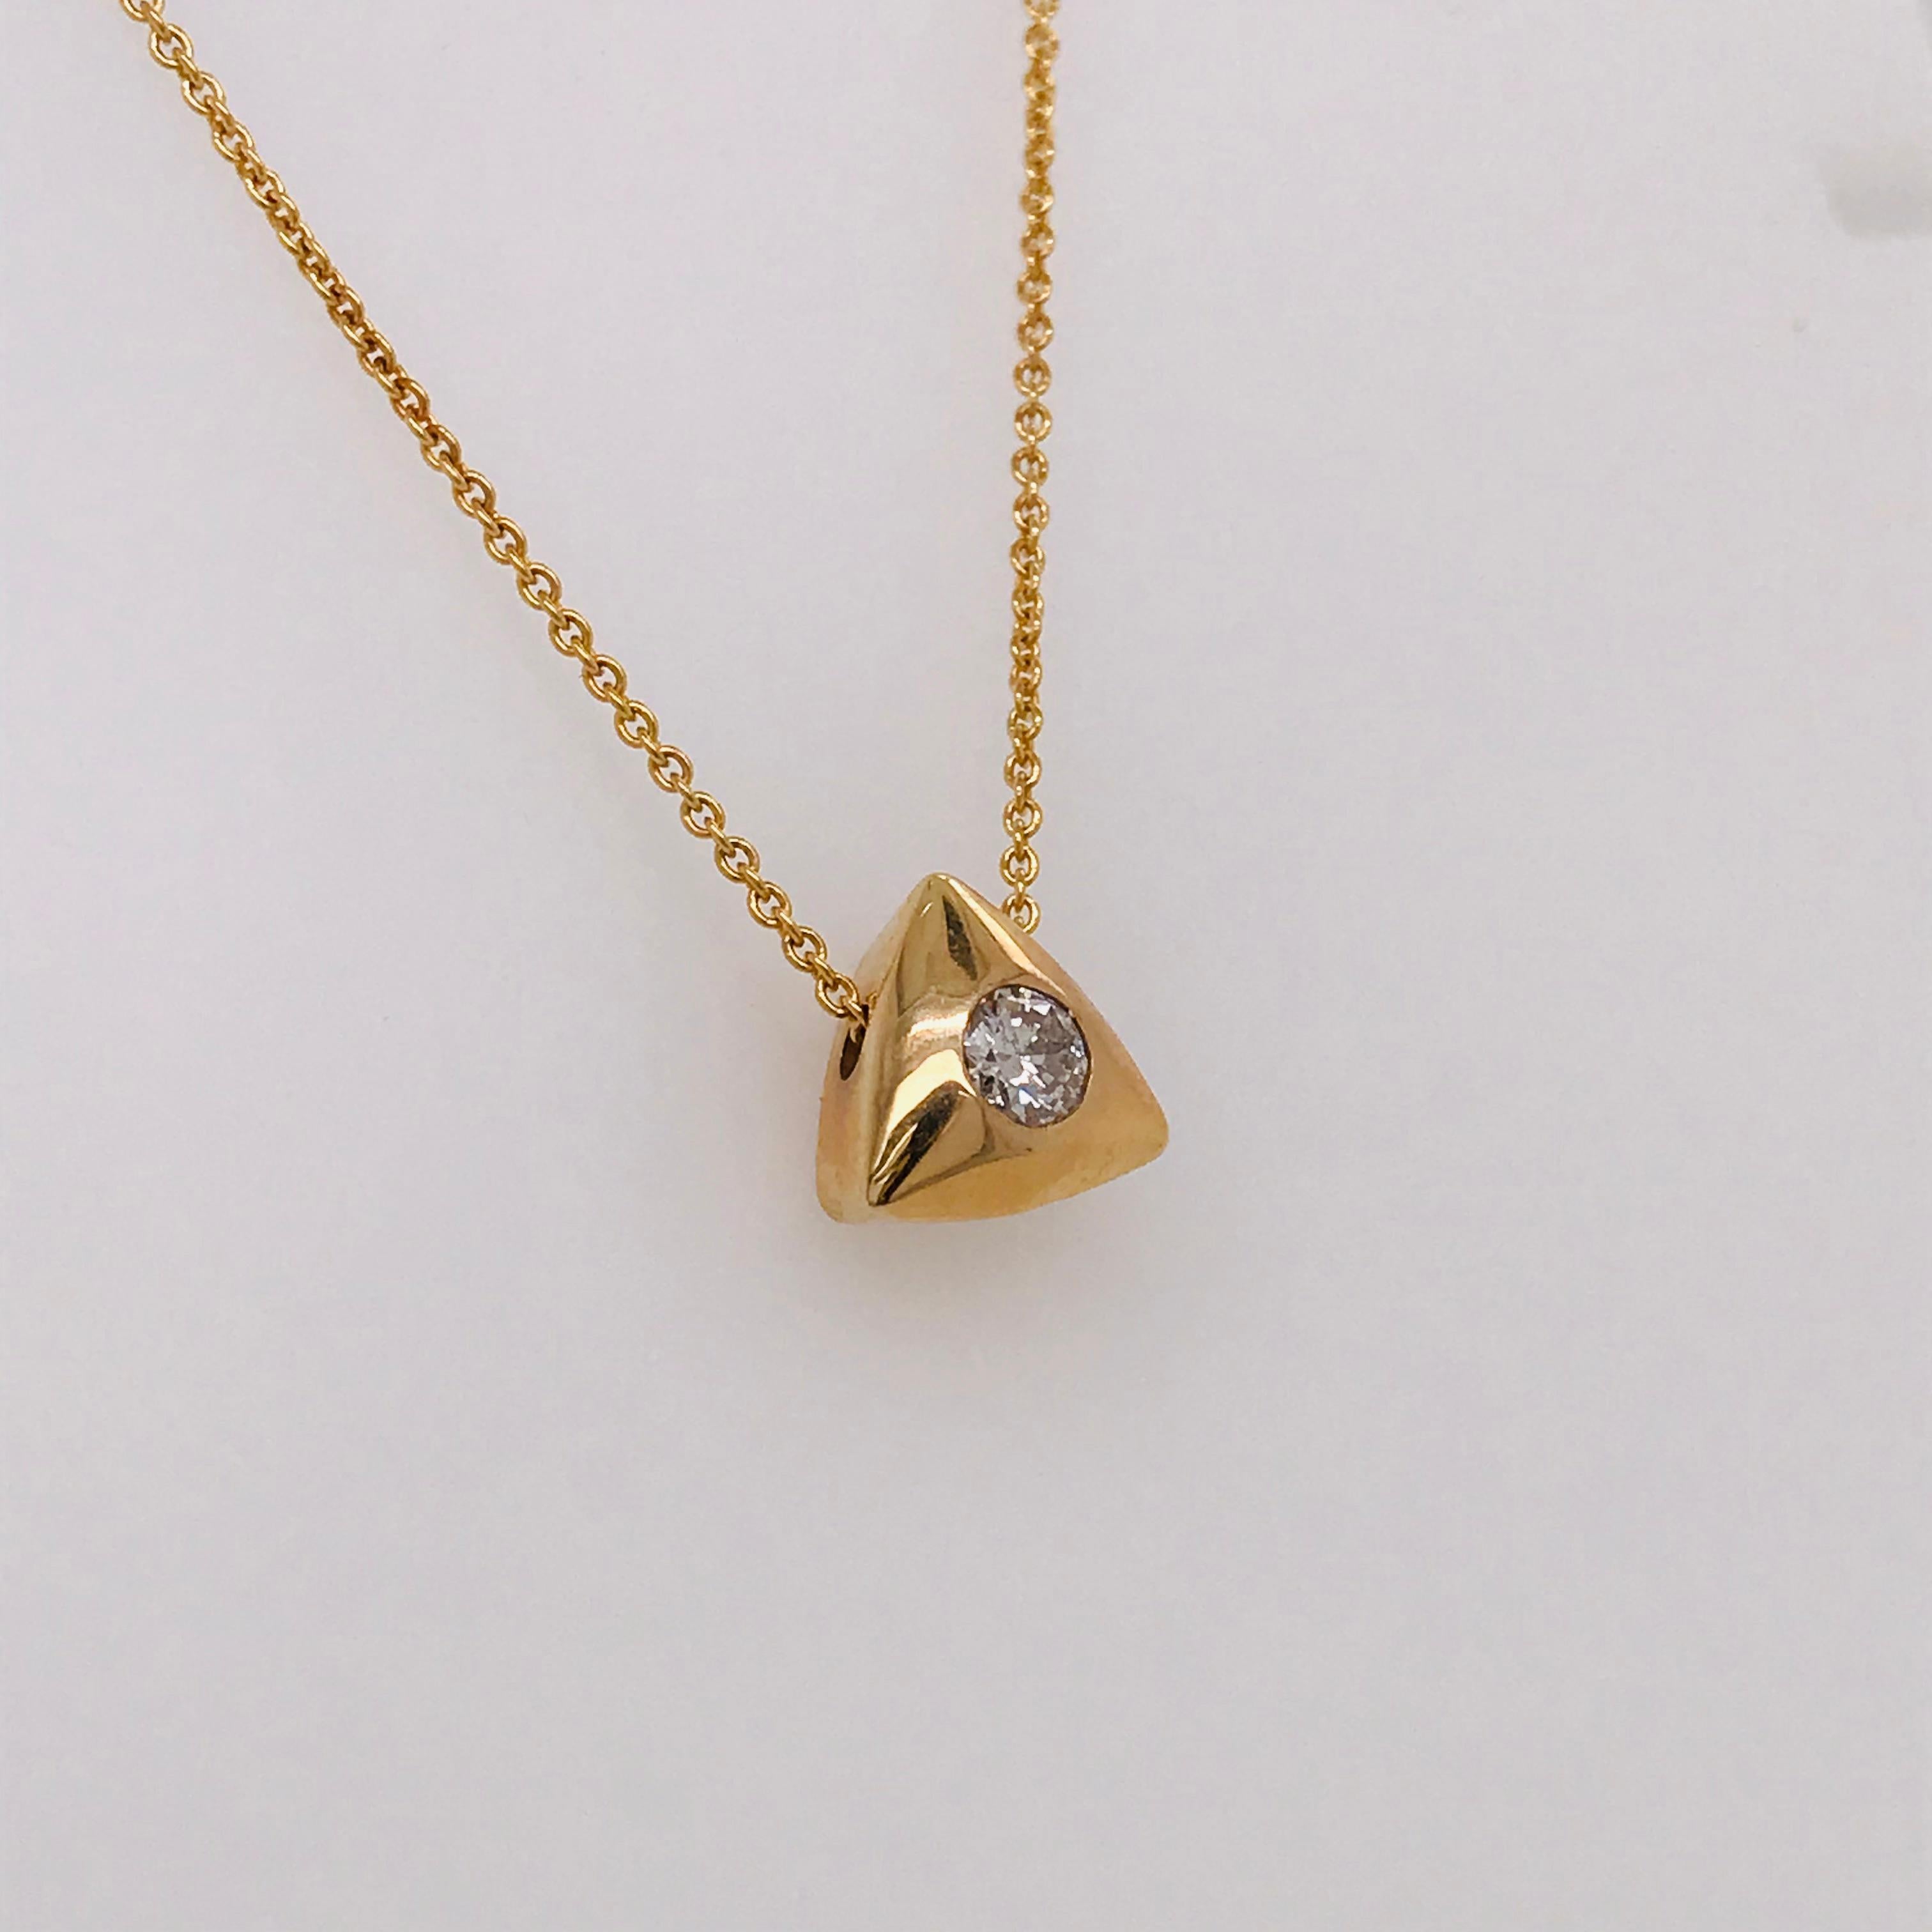 This diamond pendant has a 0.25 carat round brilliant diamond set in the center of a 14k yellow gold triangular setting. The diamond is set flush with the gold pendant. The triangular pendant is a sliding pendant that moves smoothly on the 18 inch